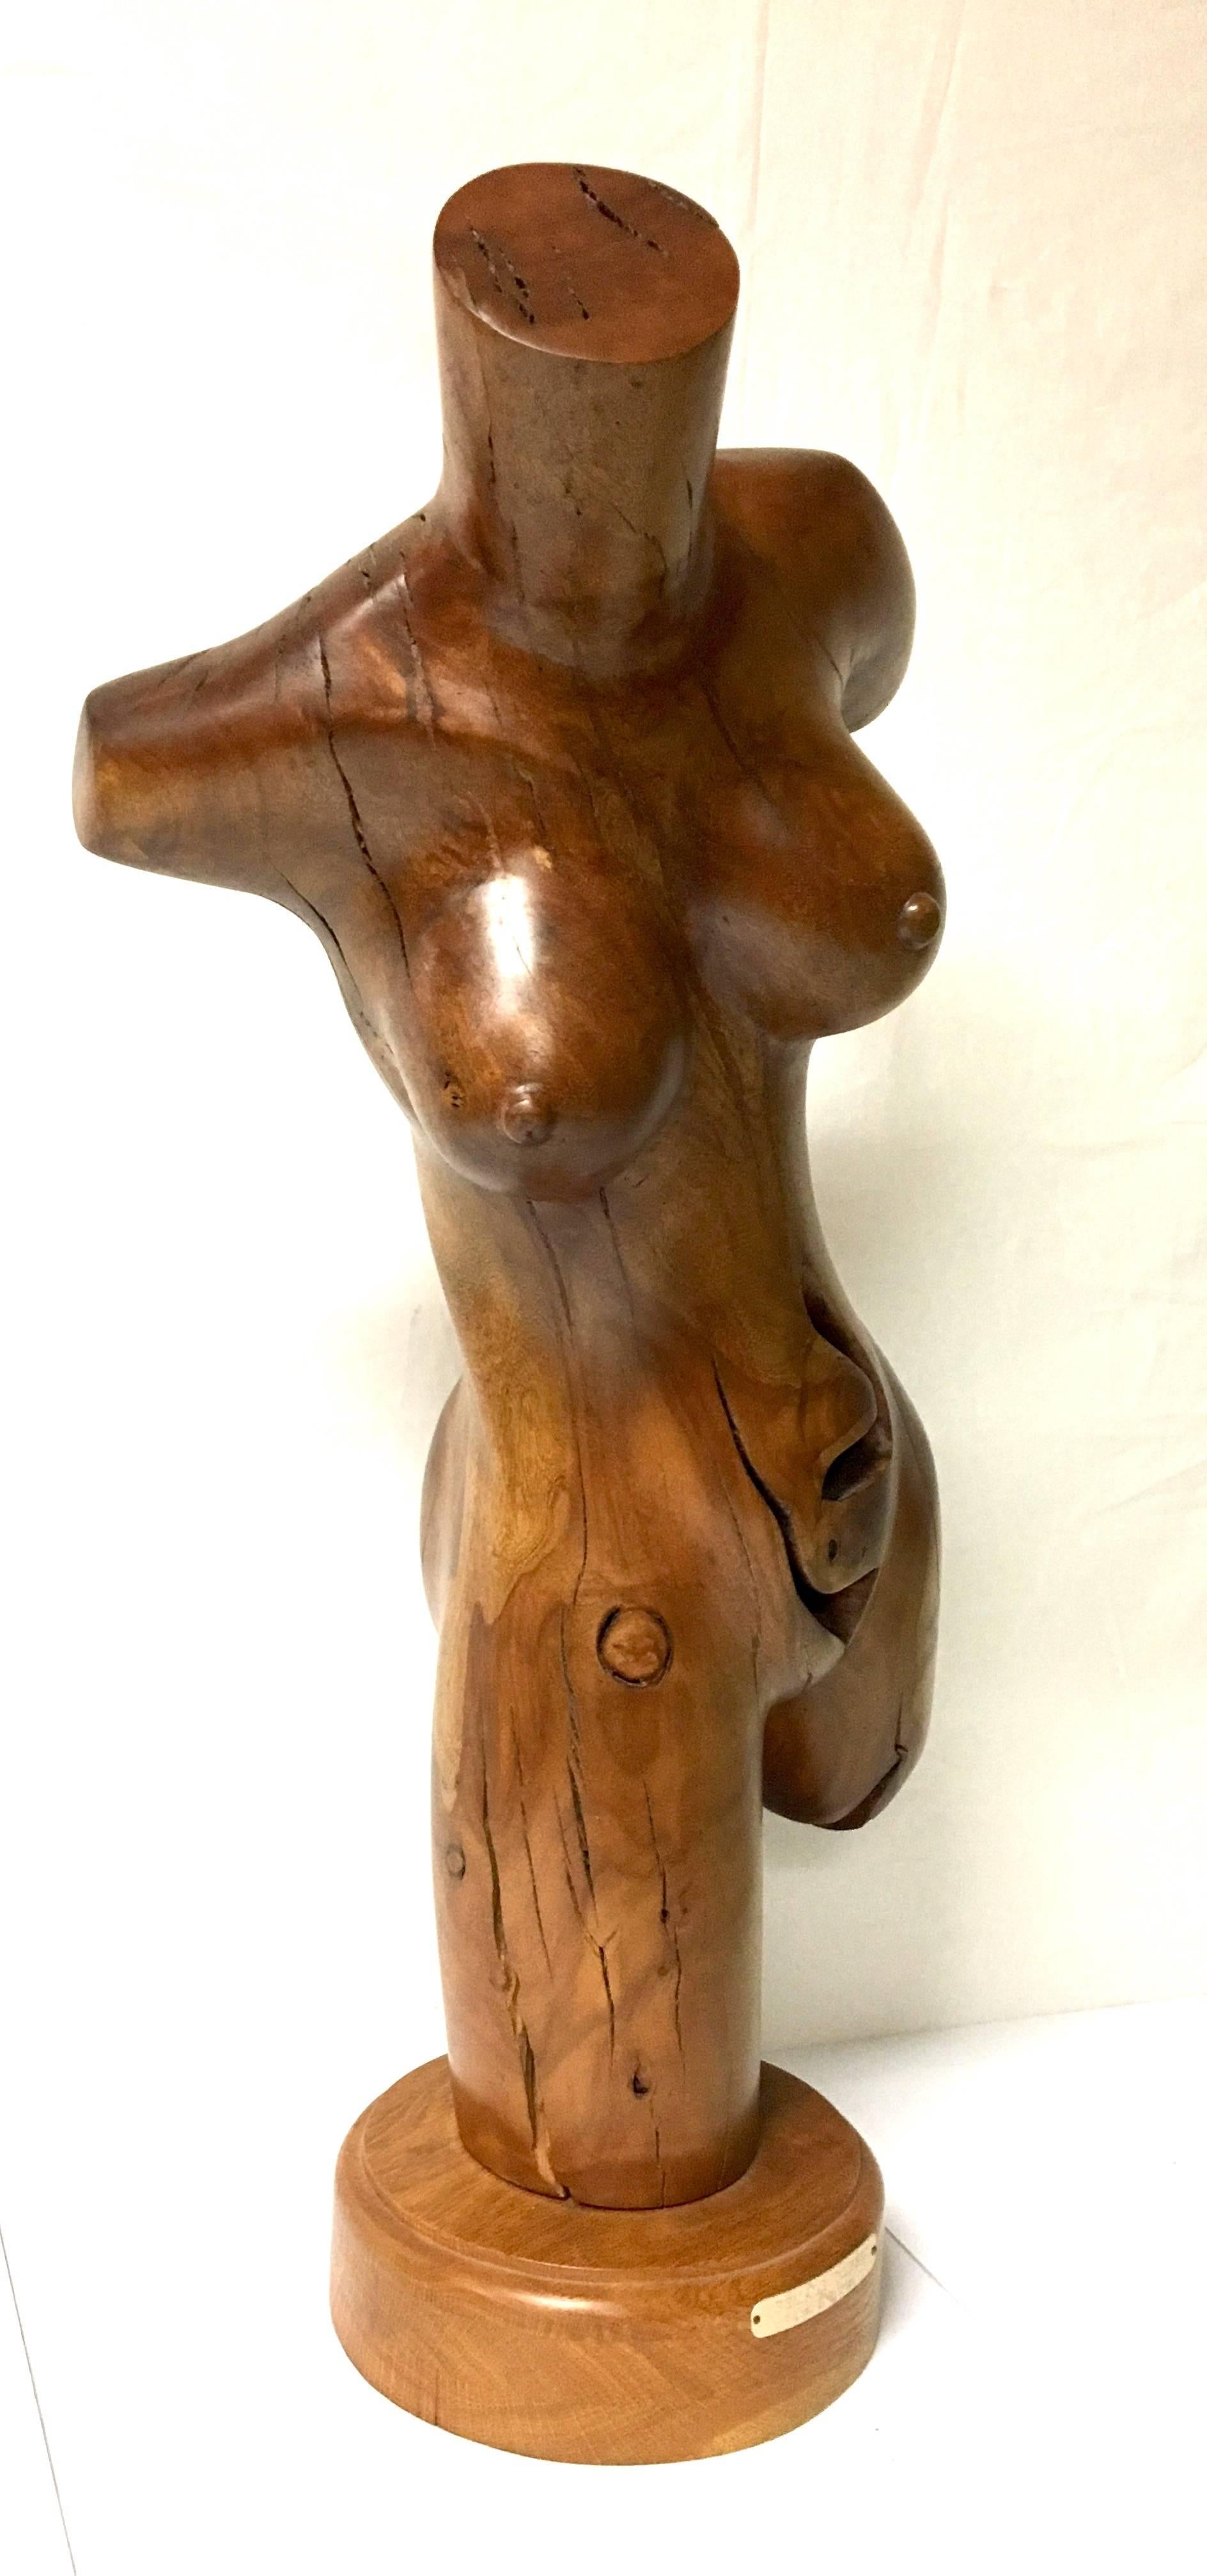 Well done hand-carved female torso by Jose Z Sabroso, California artist in solid hard wood. The stunning piece is 26